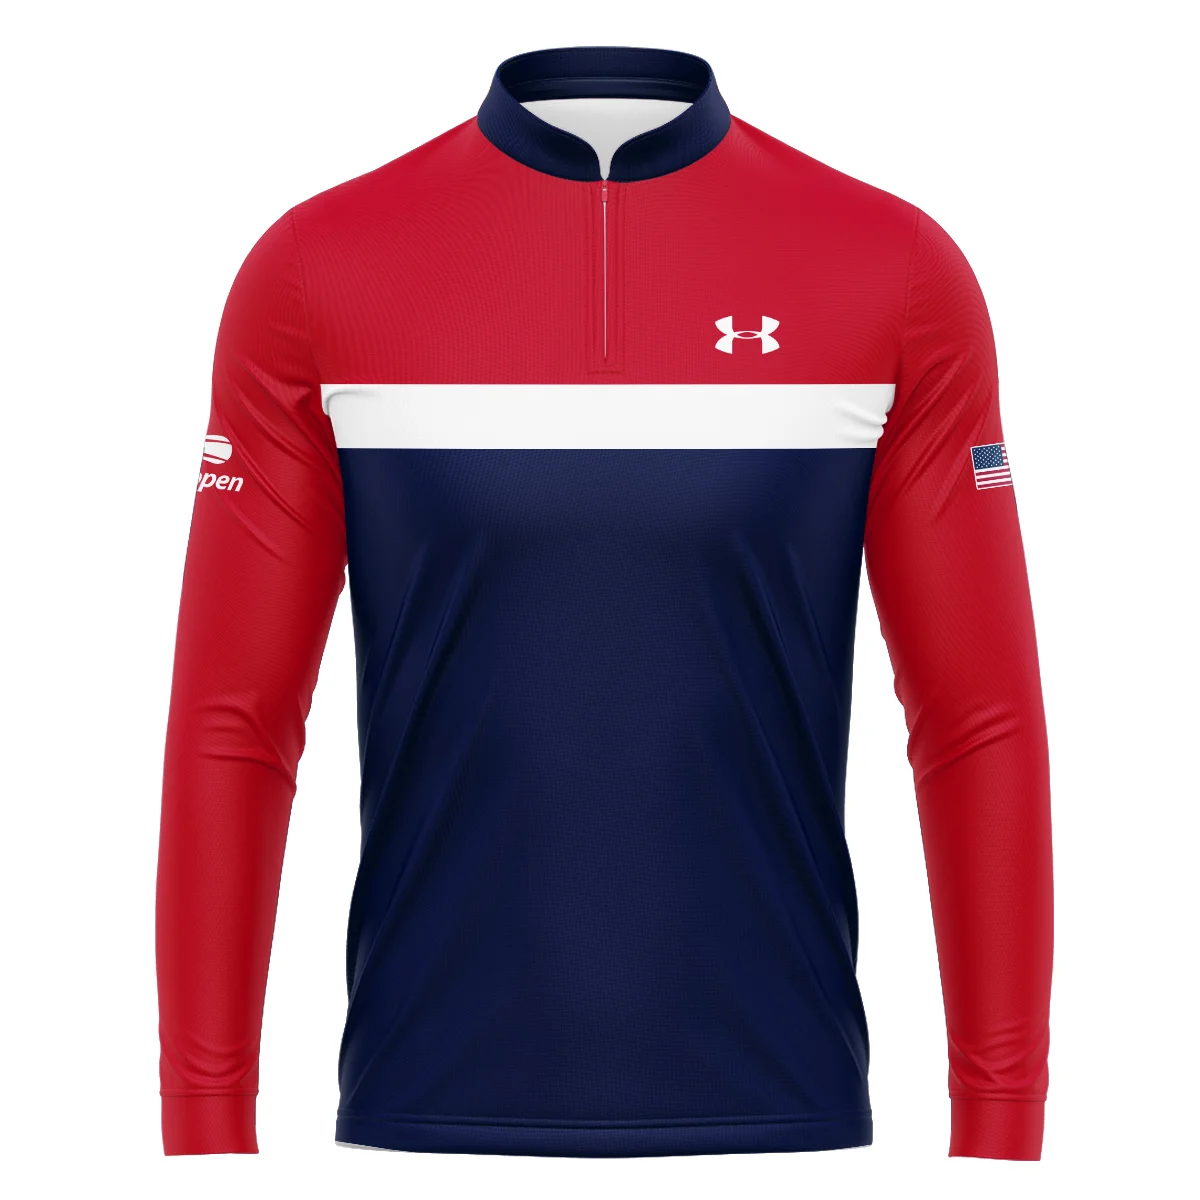 Under Armour Blue Red White Background US Open Tennis Champions Mandarin collar Quater-Zip Long Sleeve